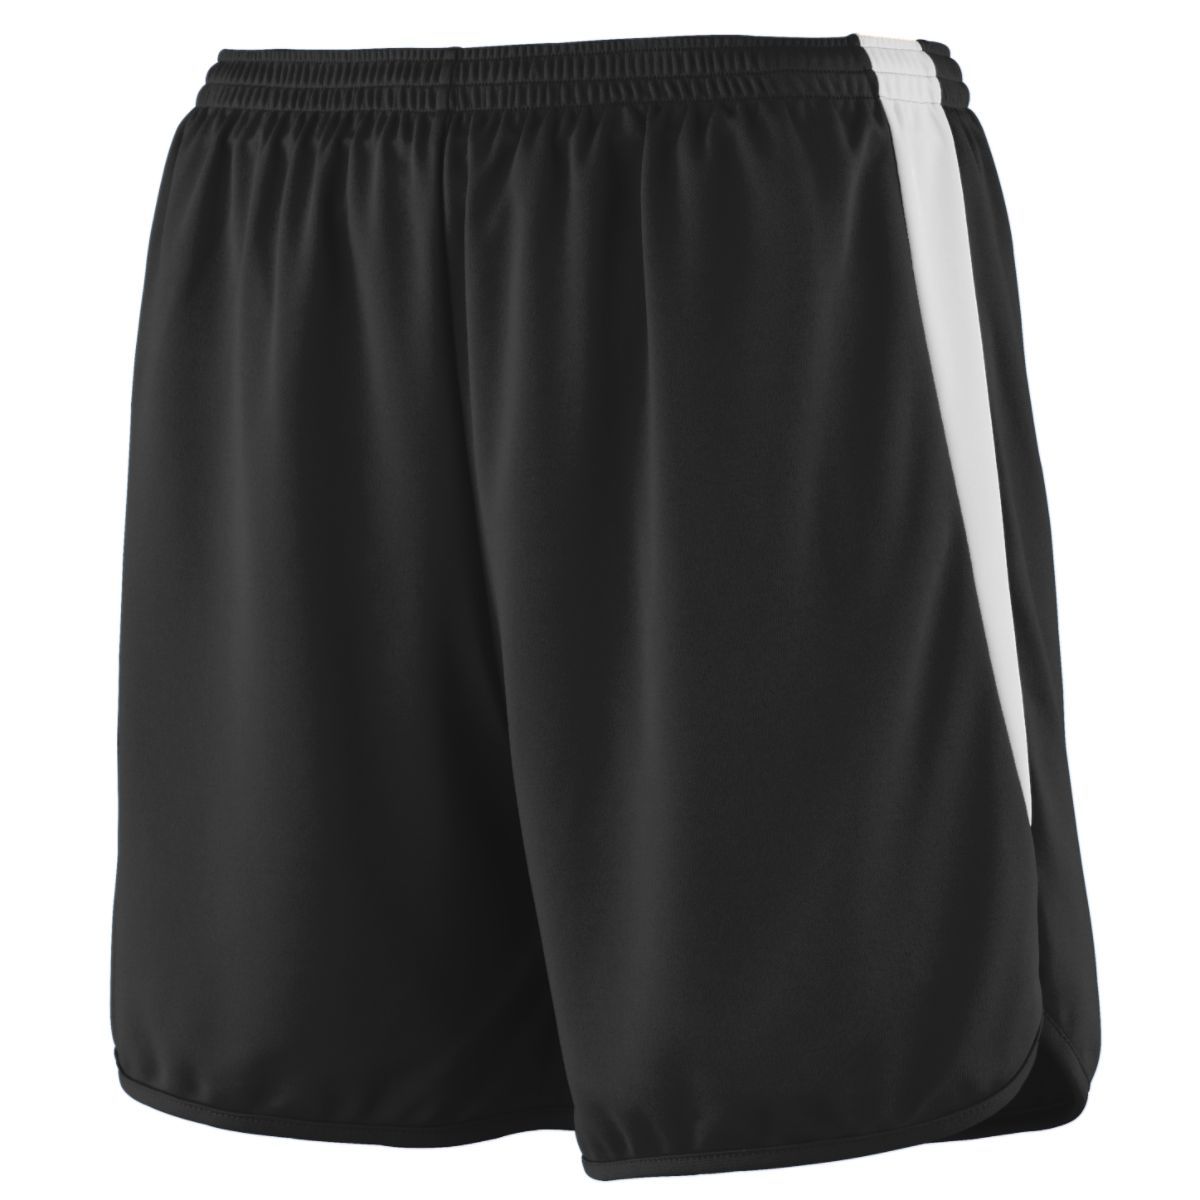 Augusta Sportswear Rapidpace Track Shorts in Black/White  -Part of the Adult, Adult-Shorts, Augusta-Products, Track-Field product lines at KanaleyCreations.com